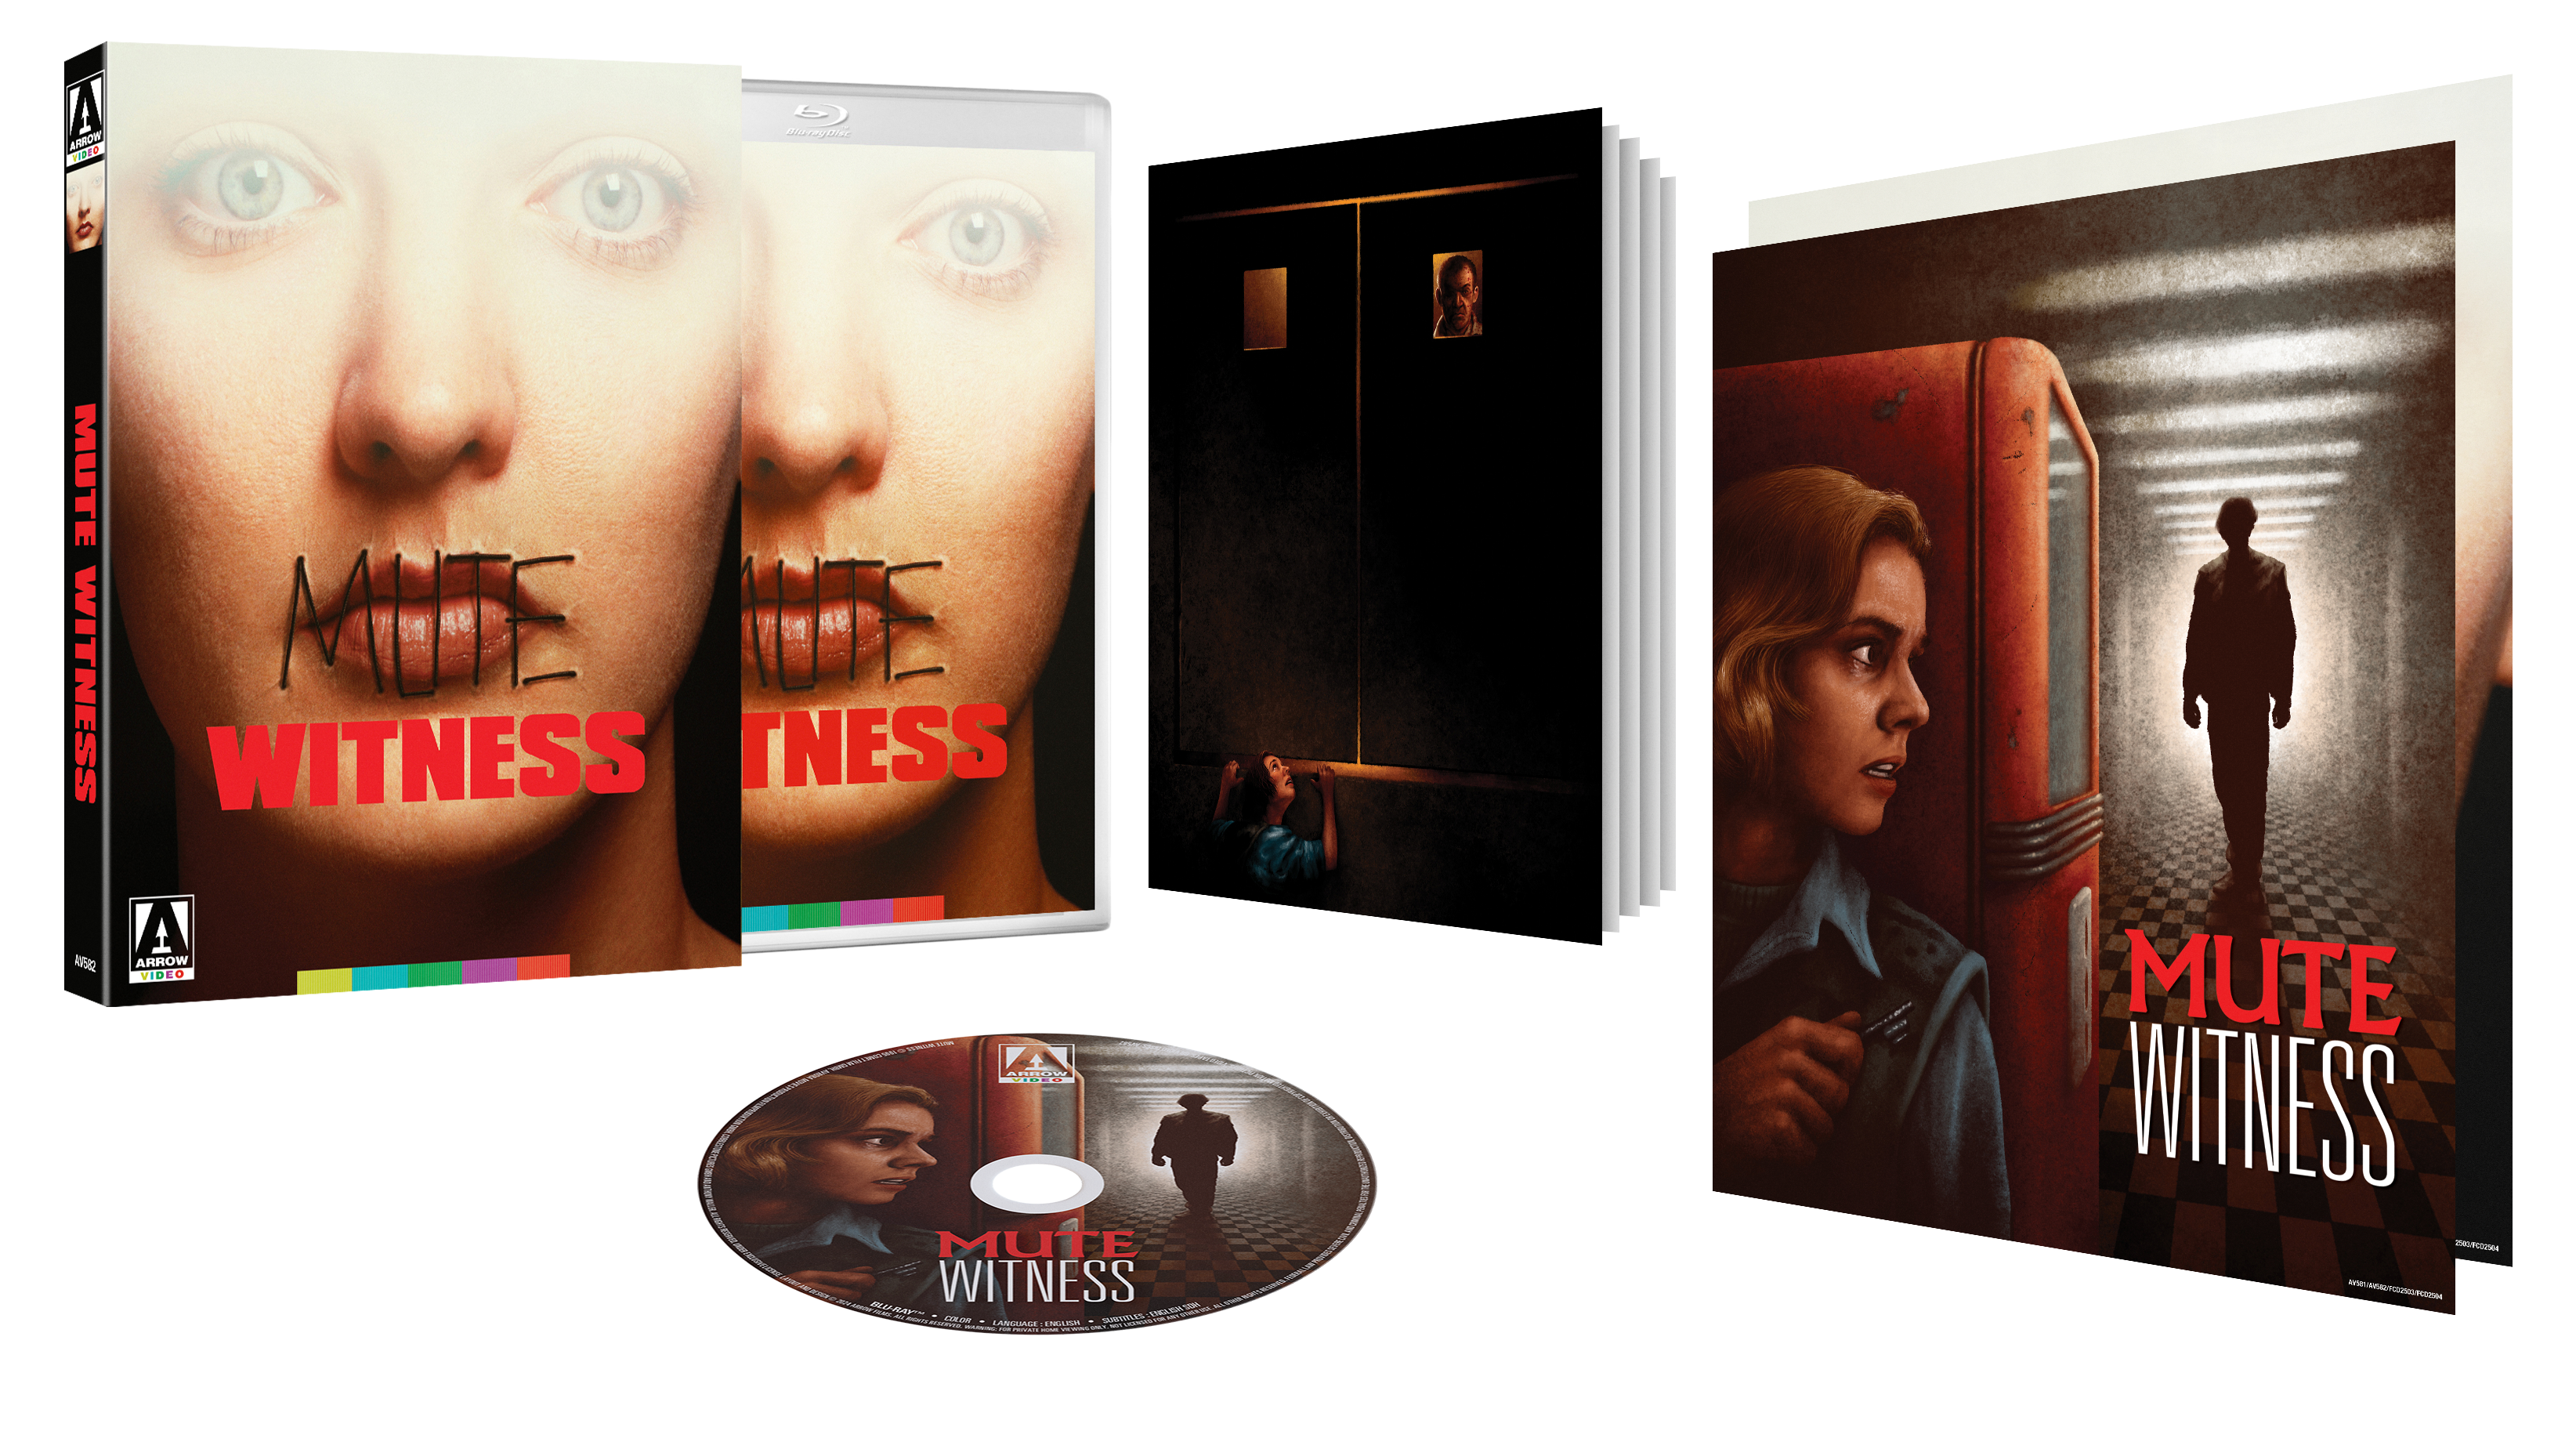 MUTE WITNESS (LIMITED EDITION) BLU-RAY [PRE-ORDER]